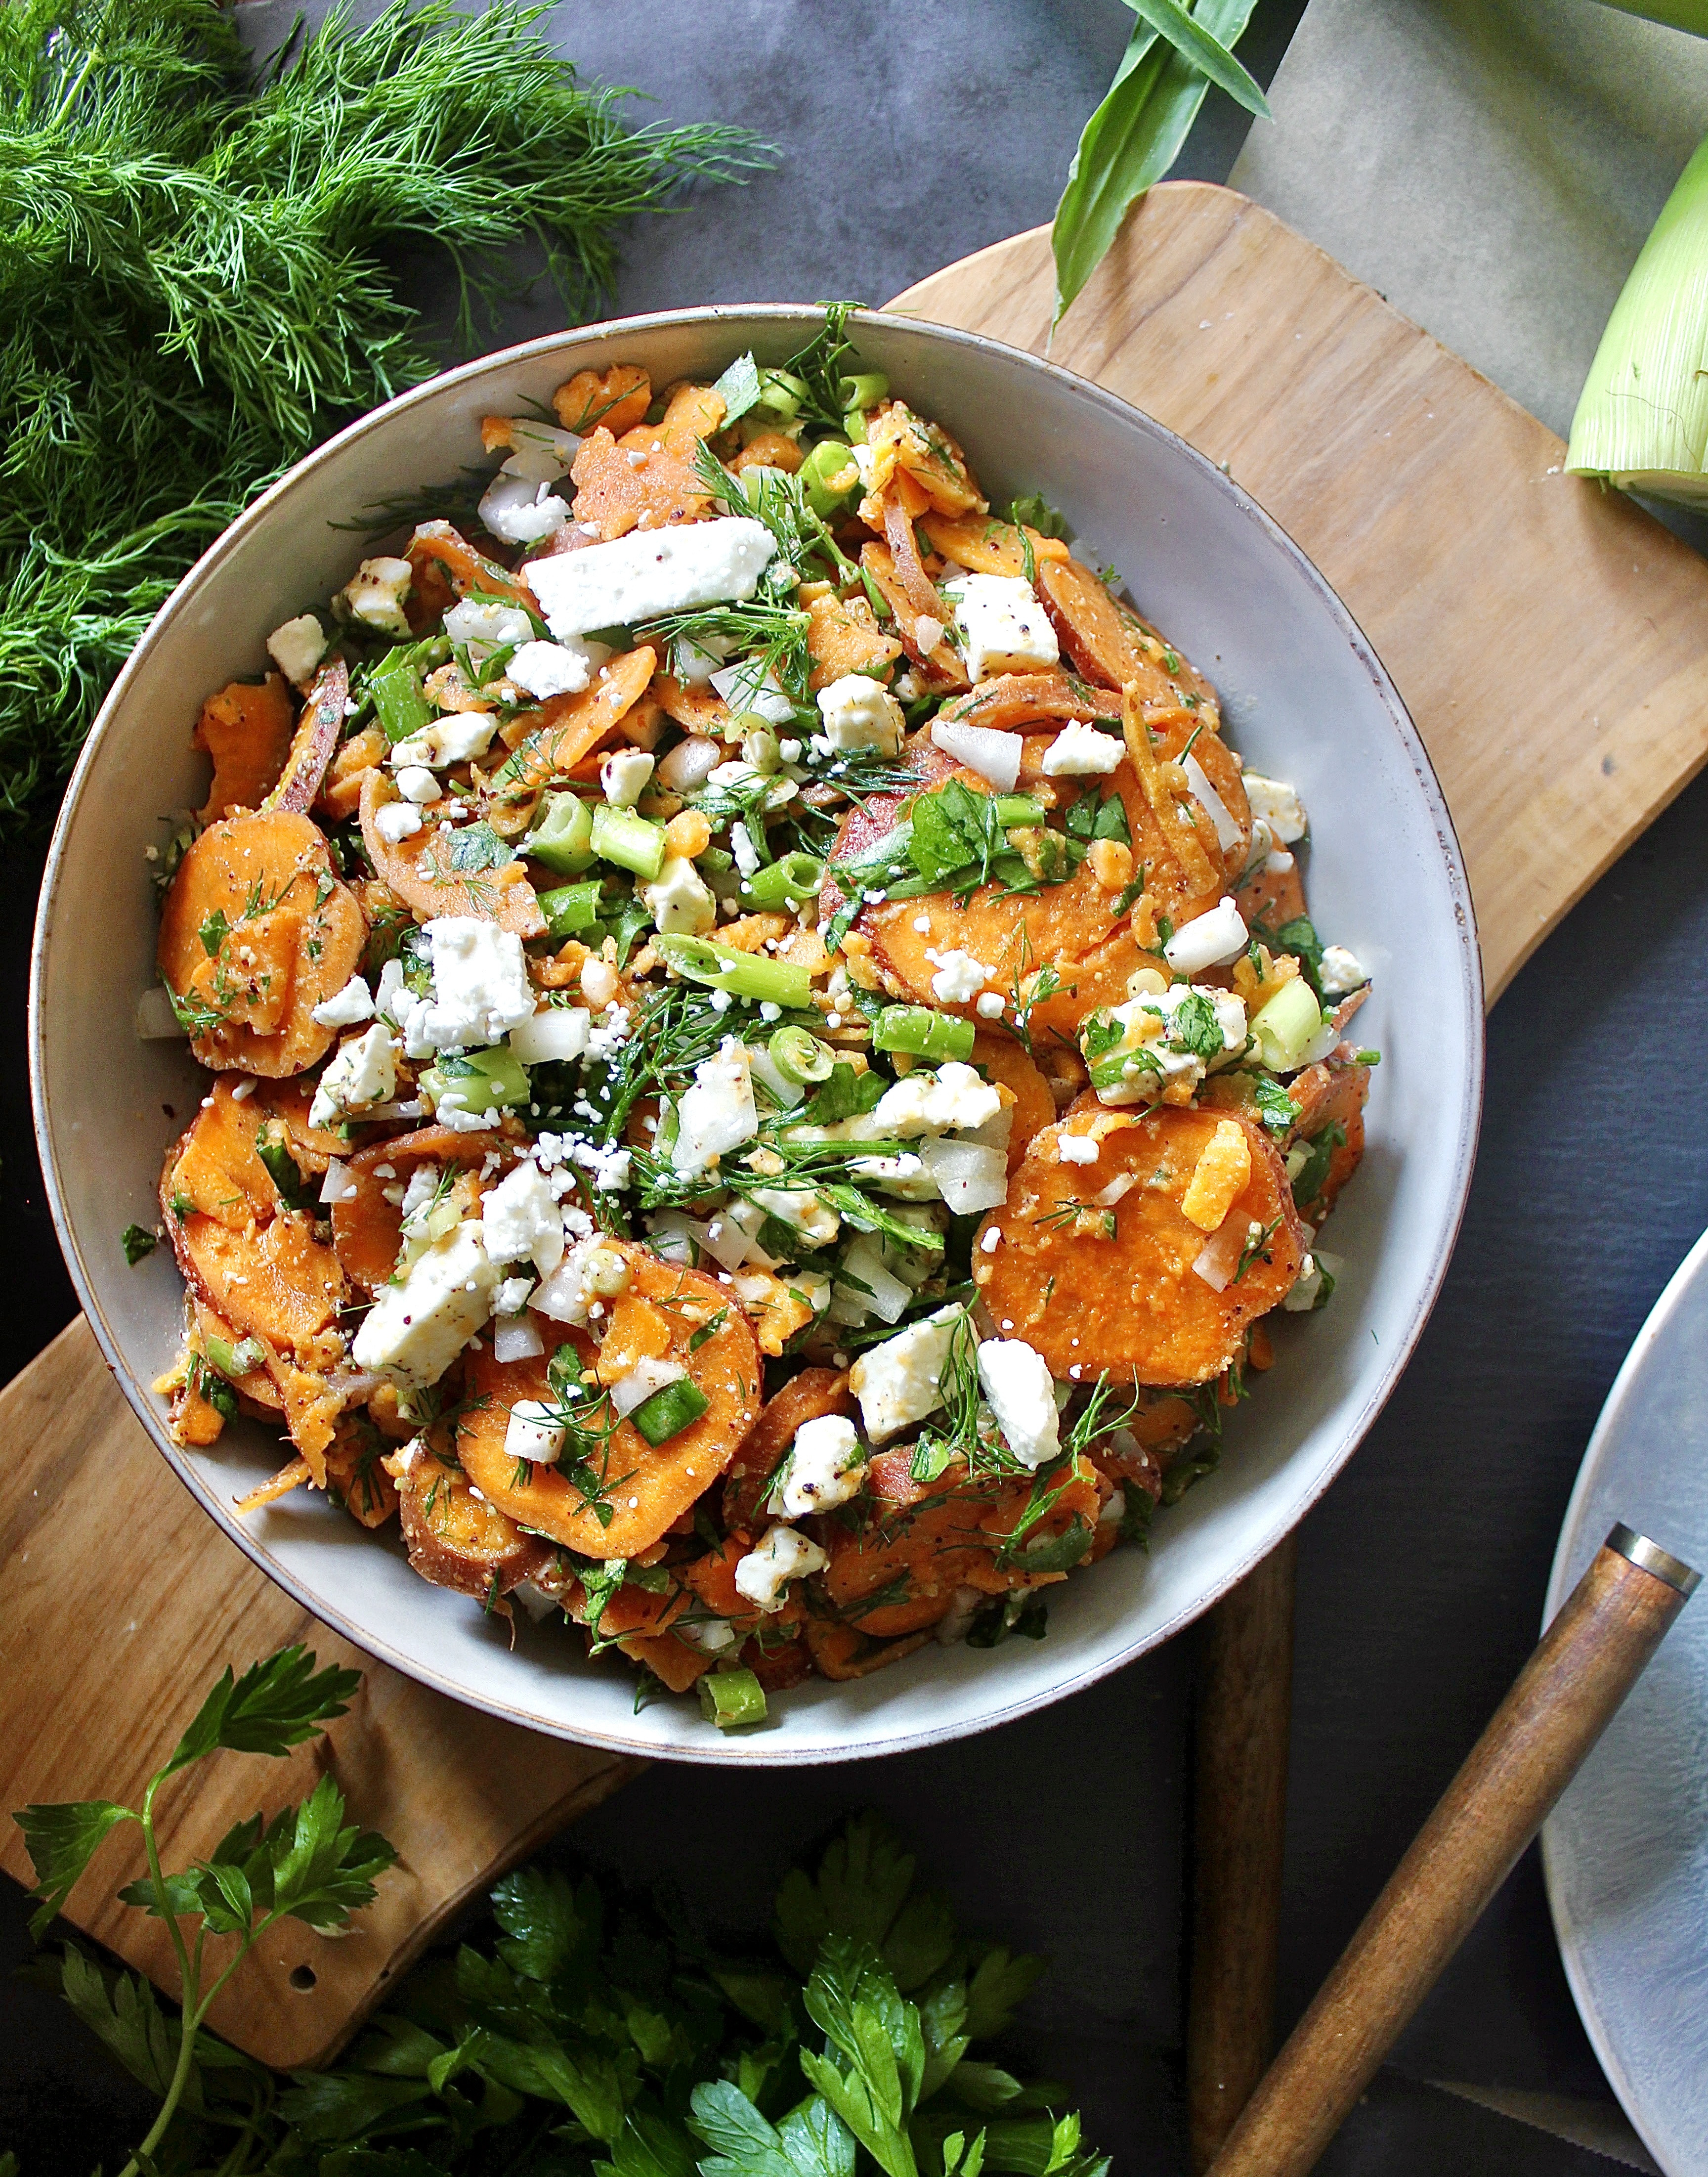  Sliced sweet potatoes and all the good Mediterranean flavors tossed in a simple Dijon vinaigrette: this Greek Style Dijon Sweet Potato Salad really has it all!!